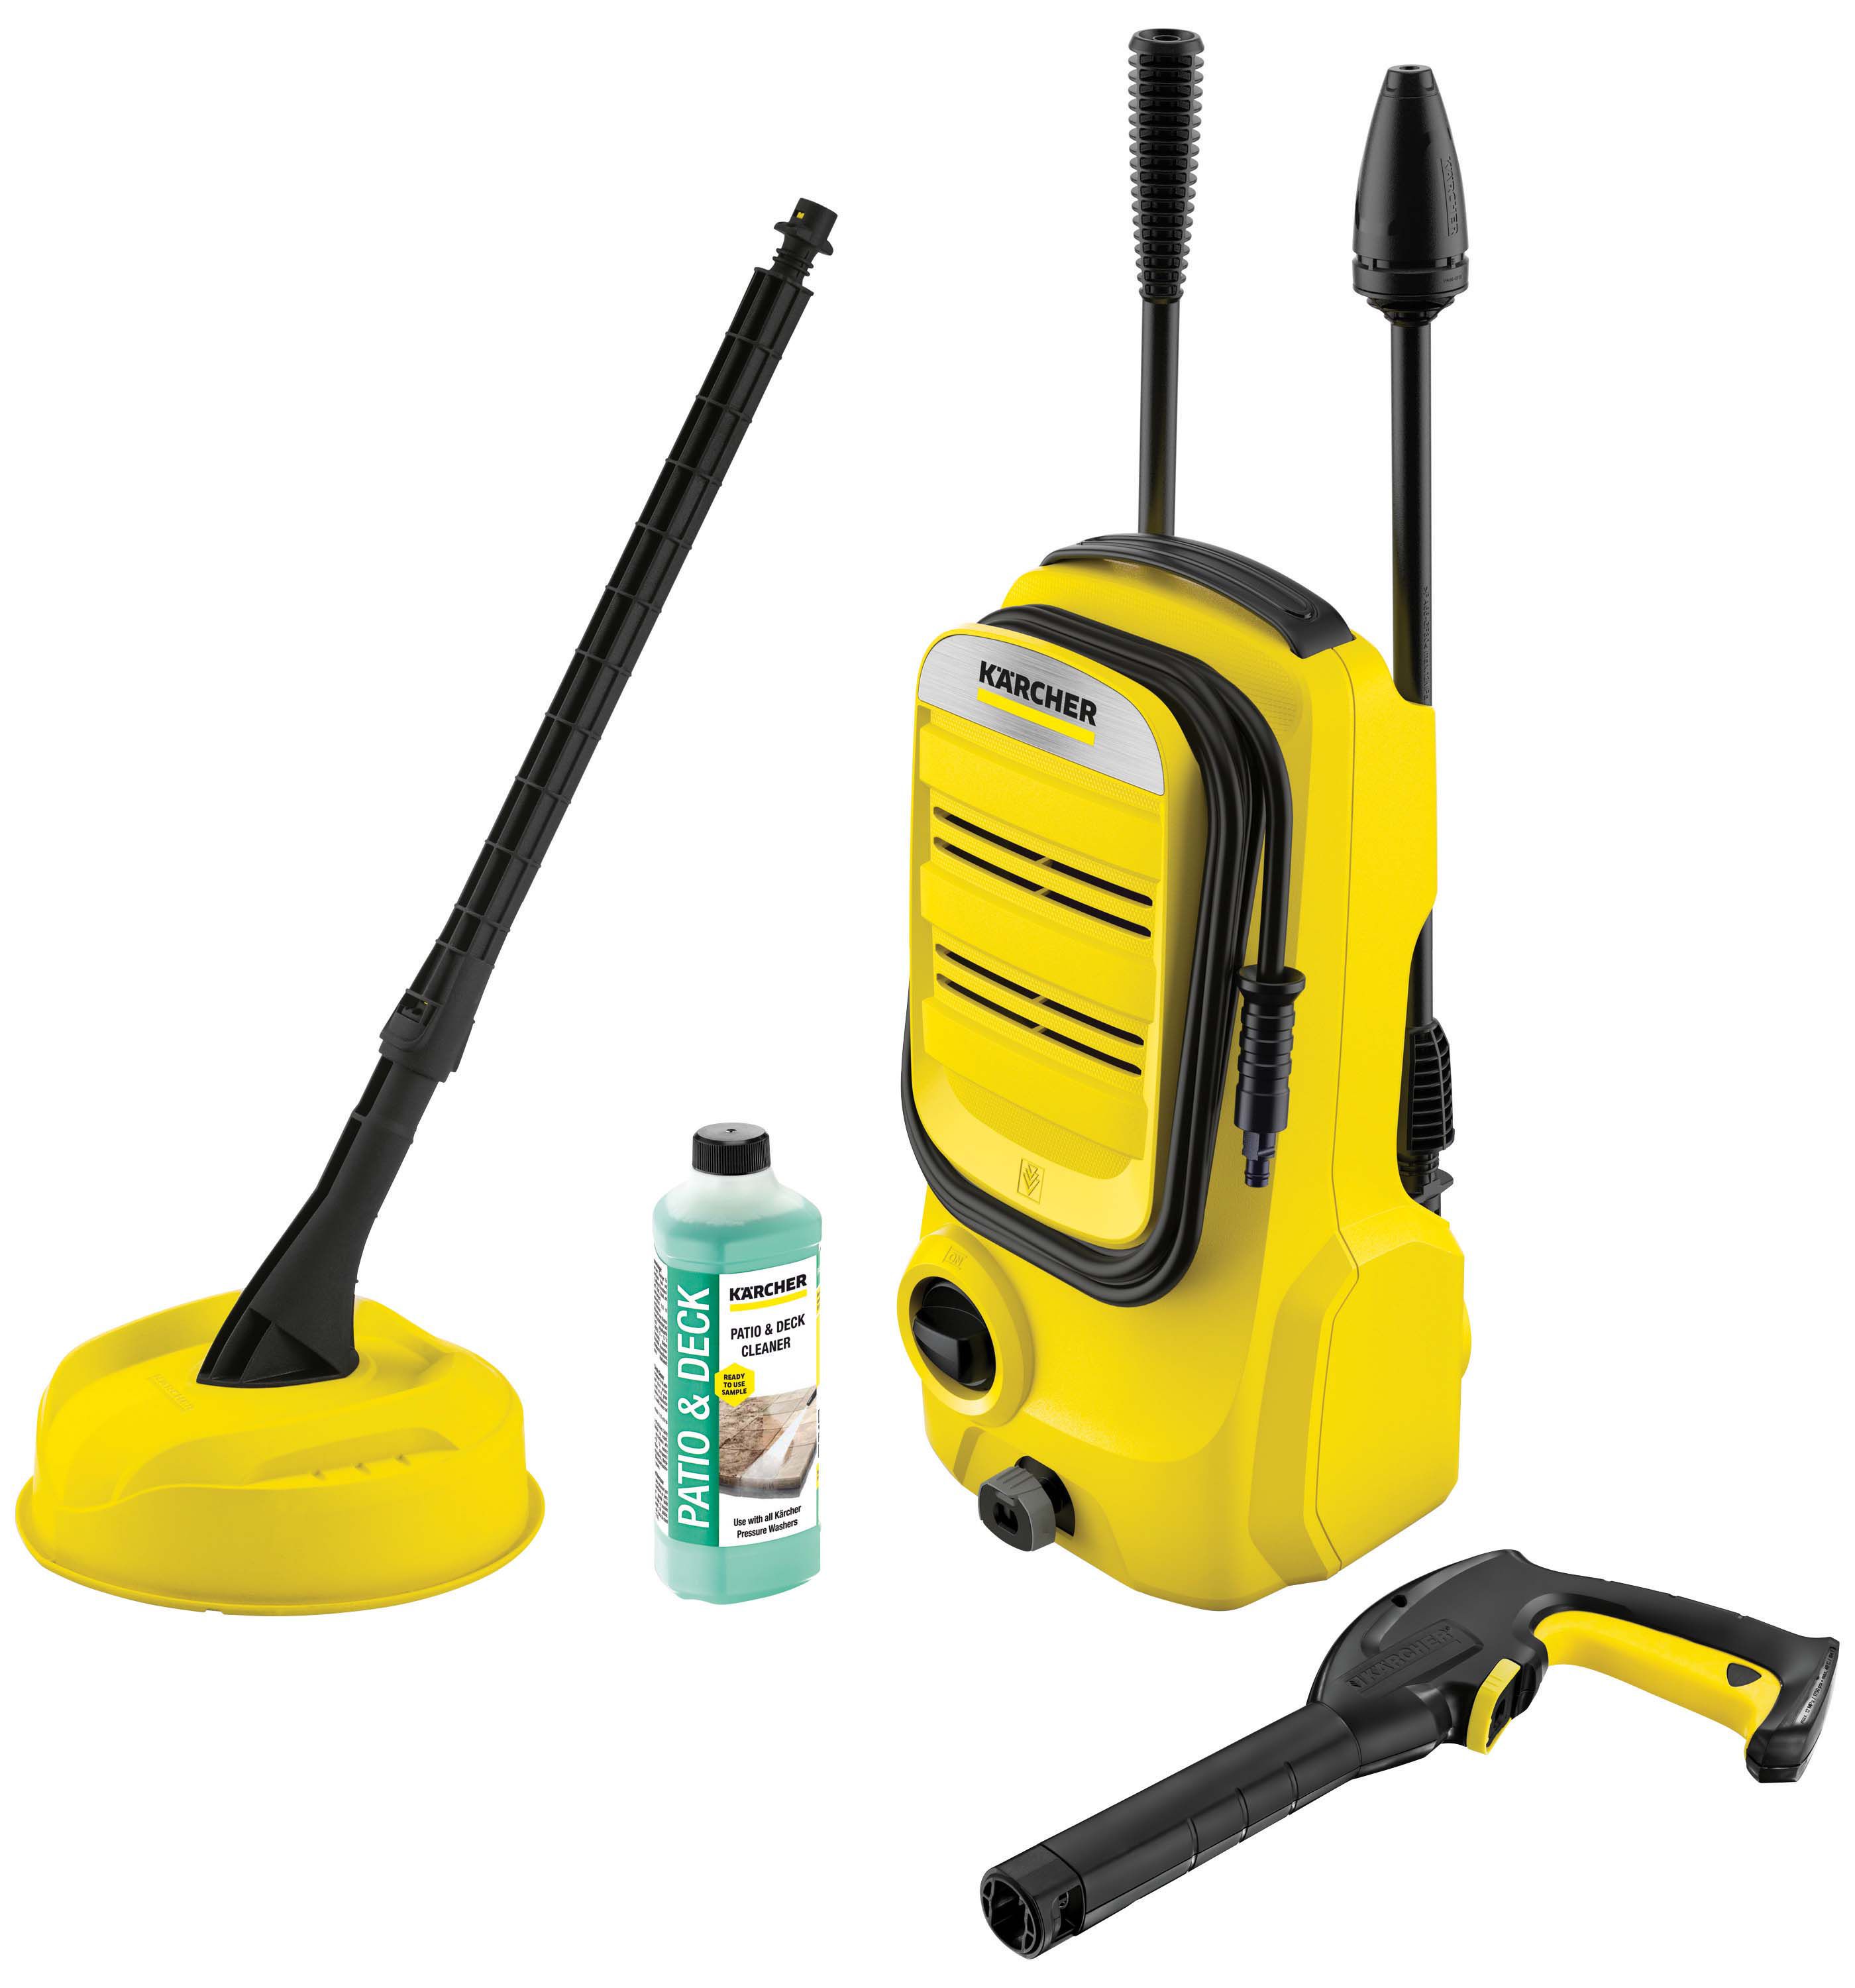 Image of Karcher K2 Compact Home Pressure Washer